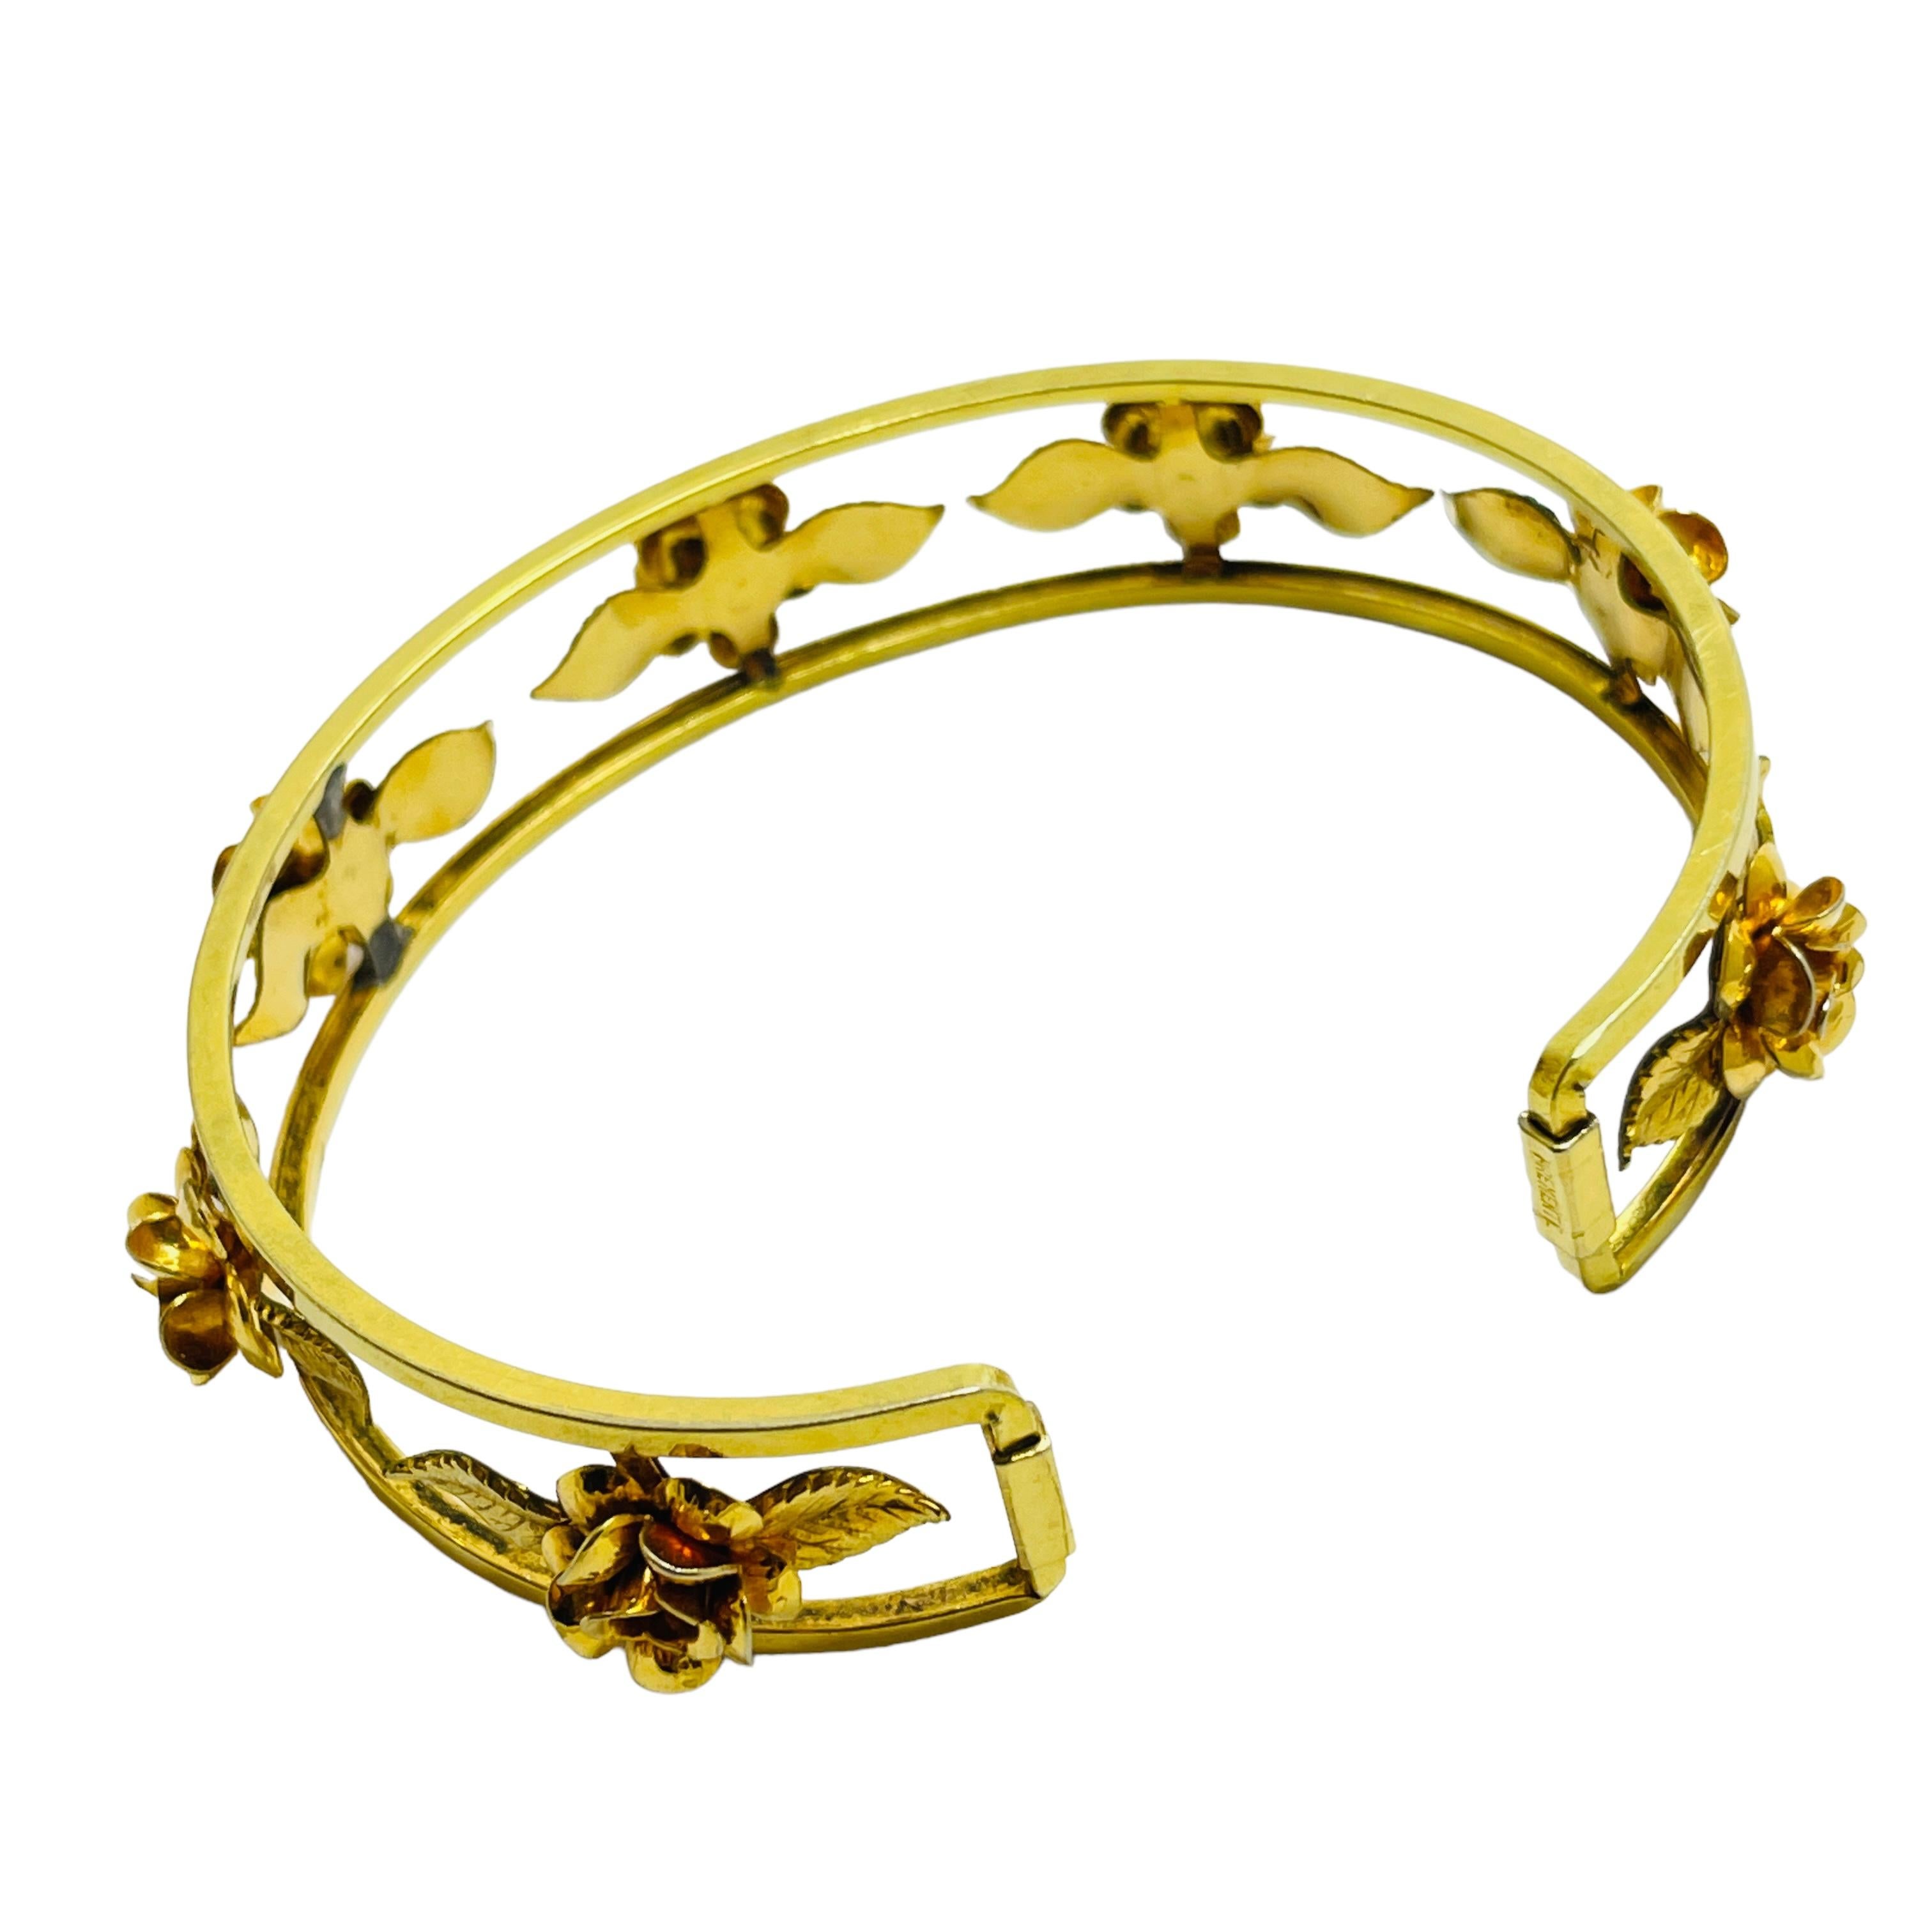 Vintage gold tone flower cuff bracelet In Good Condition For Sale In Palos Hills, IL